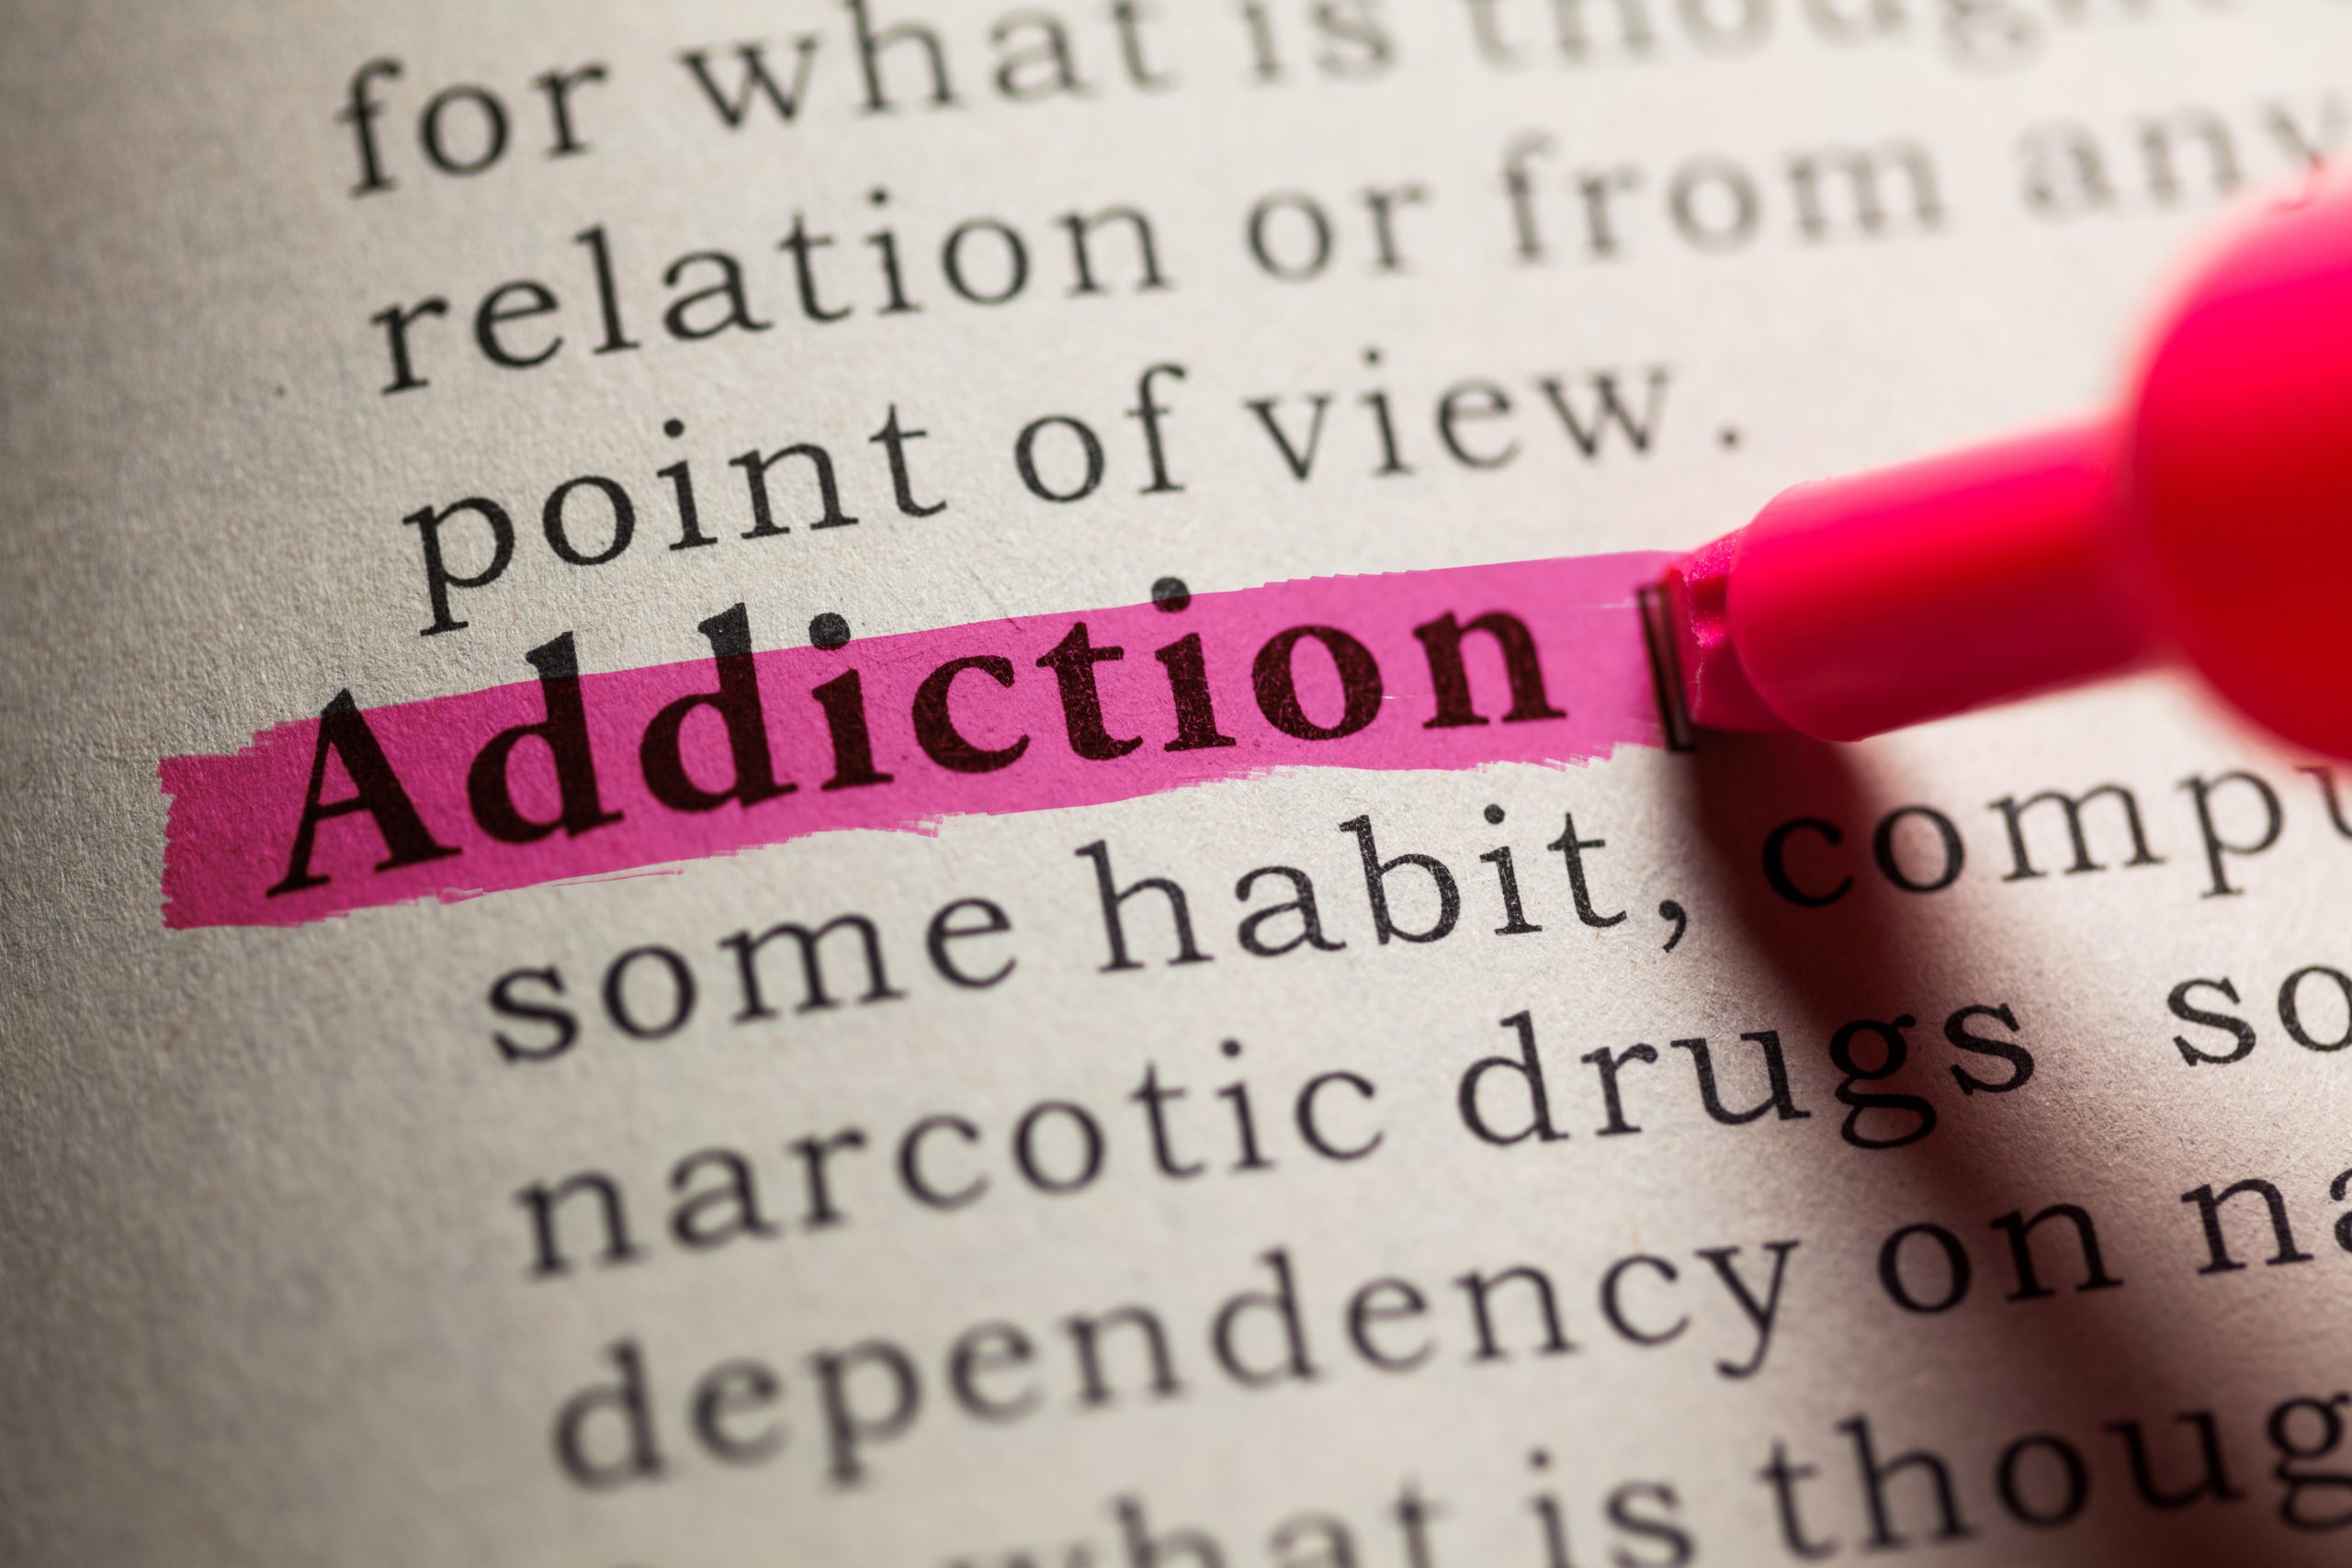 What causes addiction?